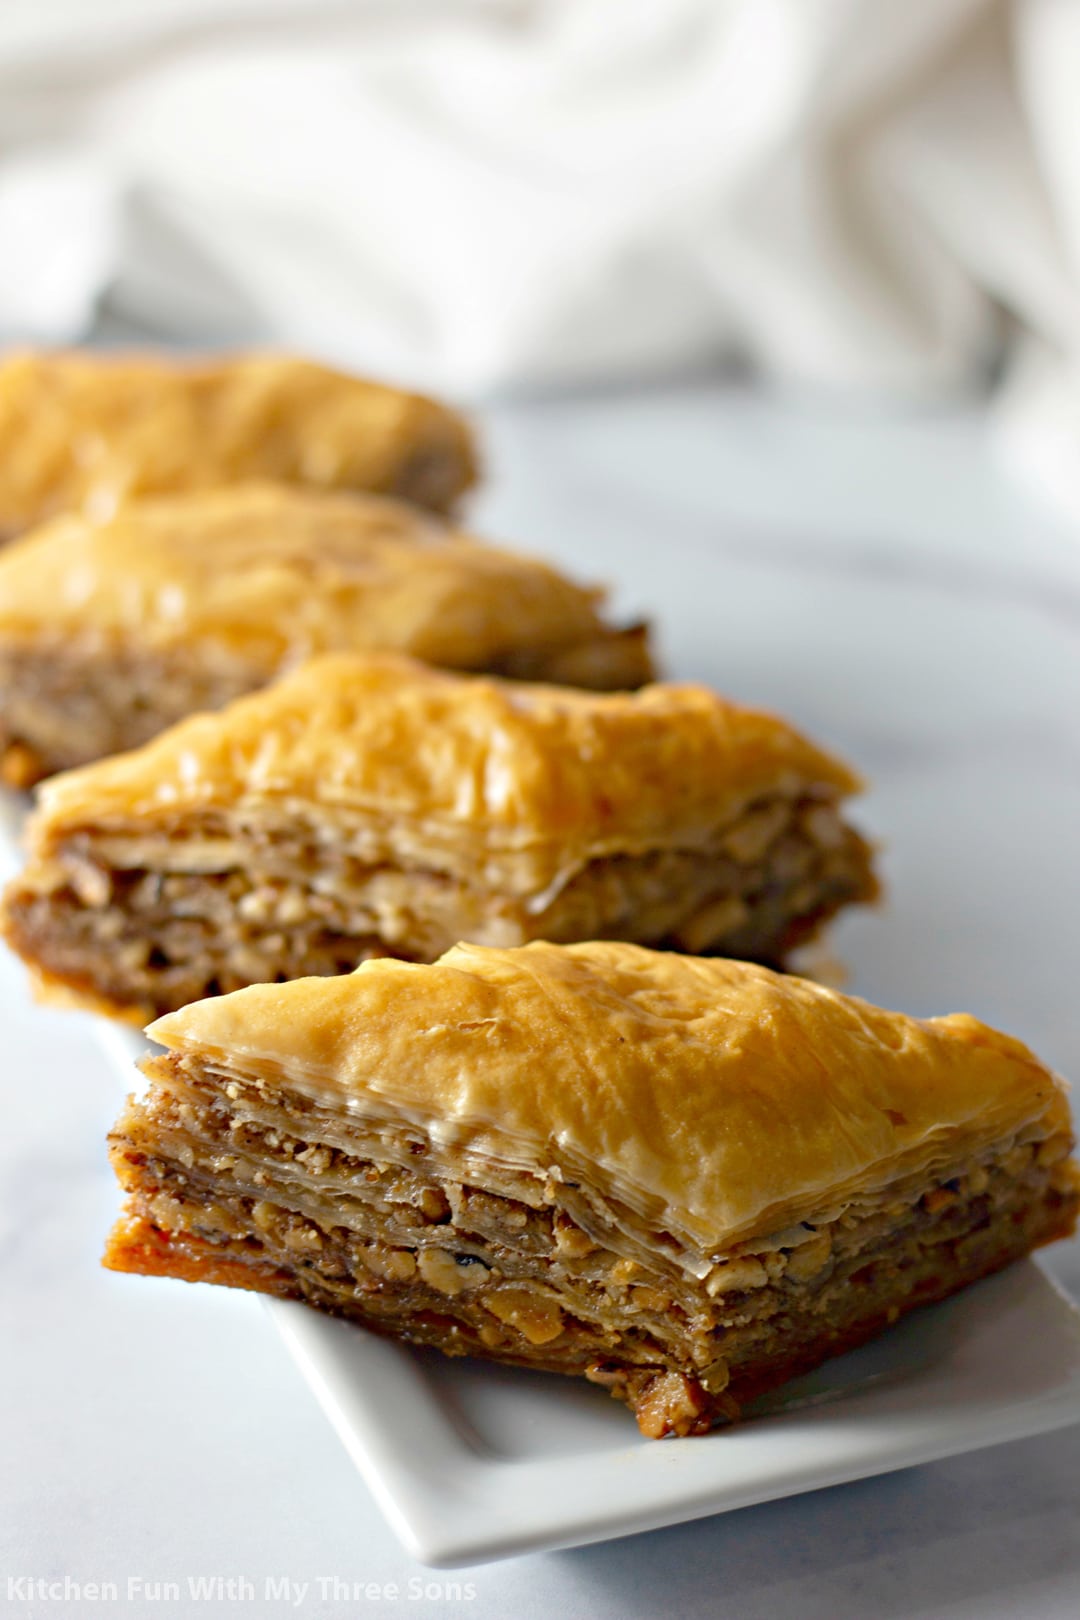 Close-up shot of baklava from the side, showcasing the layers of phyllo pastry and walnut filling.